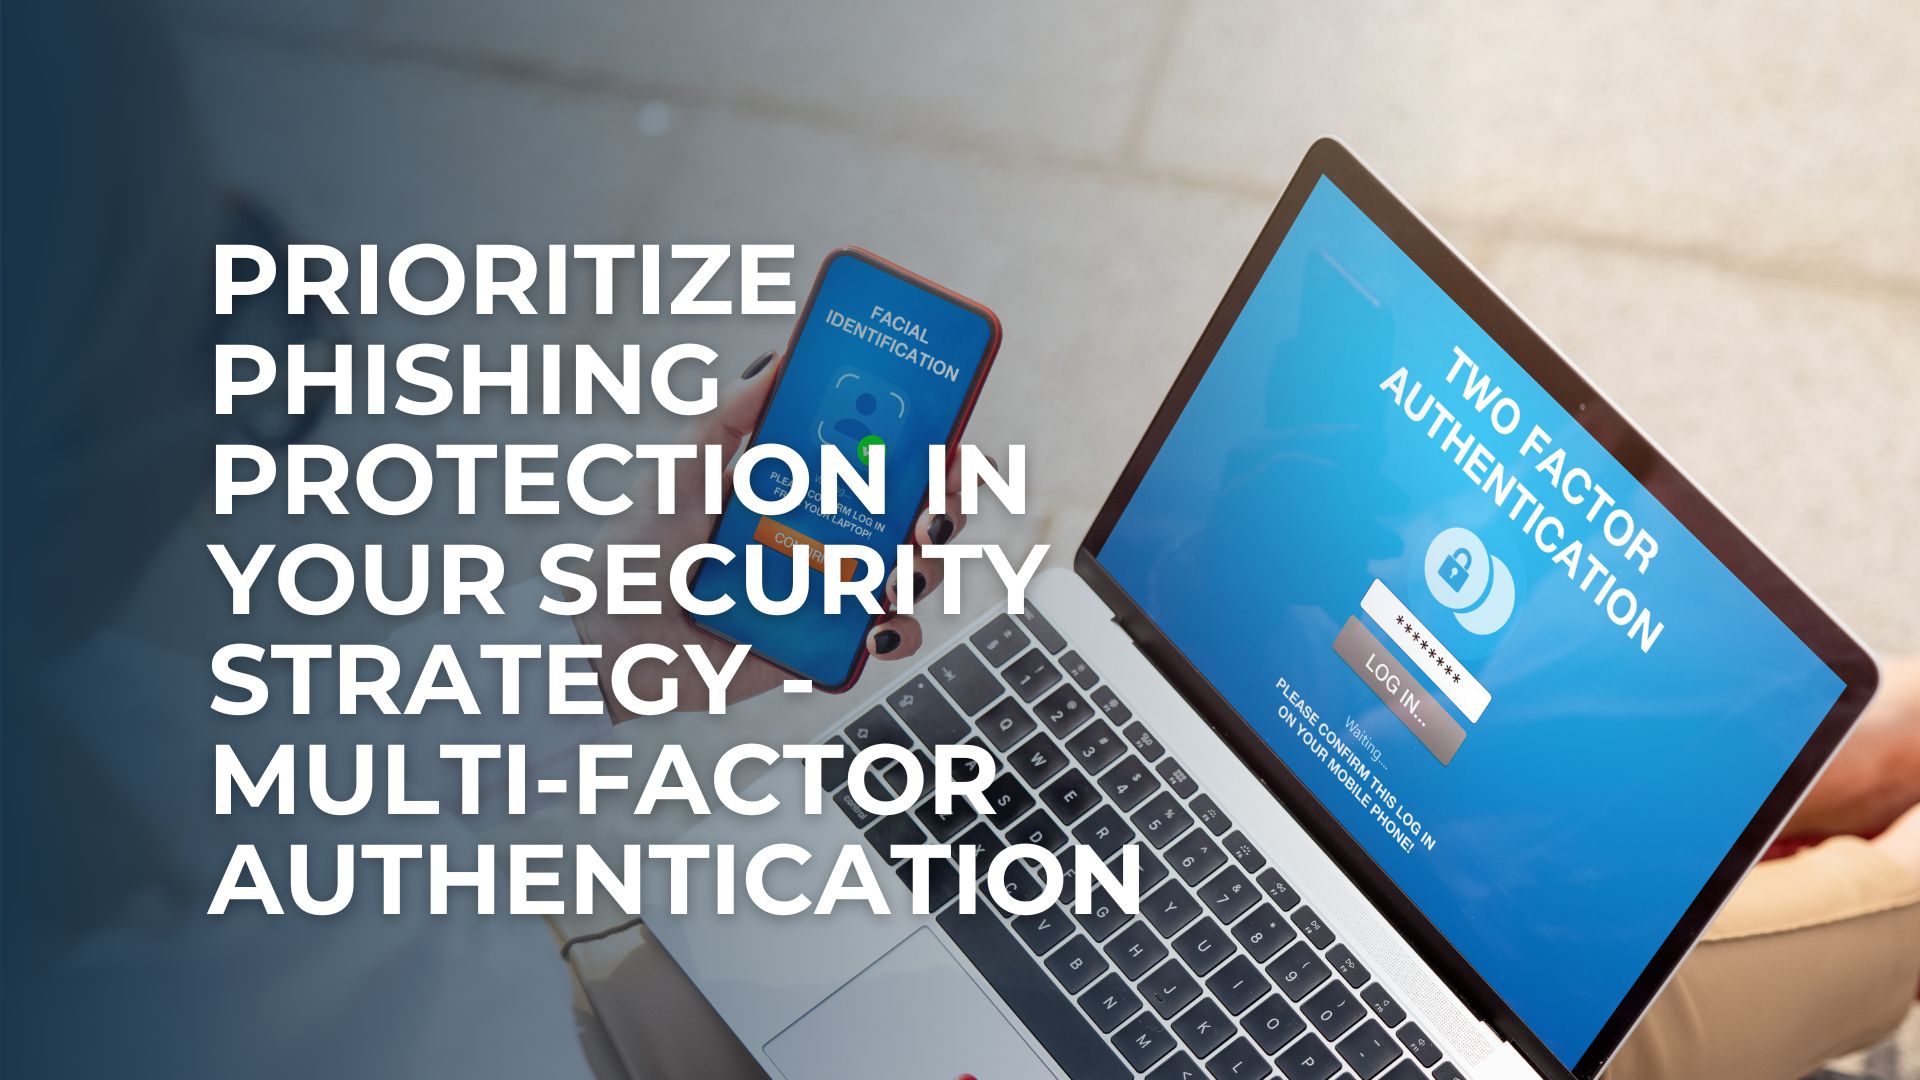 Prioritize Phishing Protection in Your Security Strategy - Multi-Factor Authentication